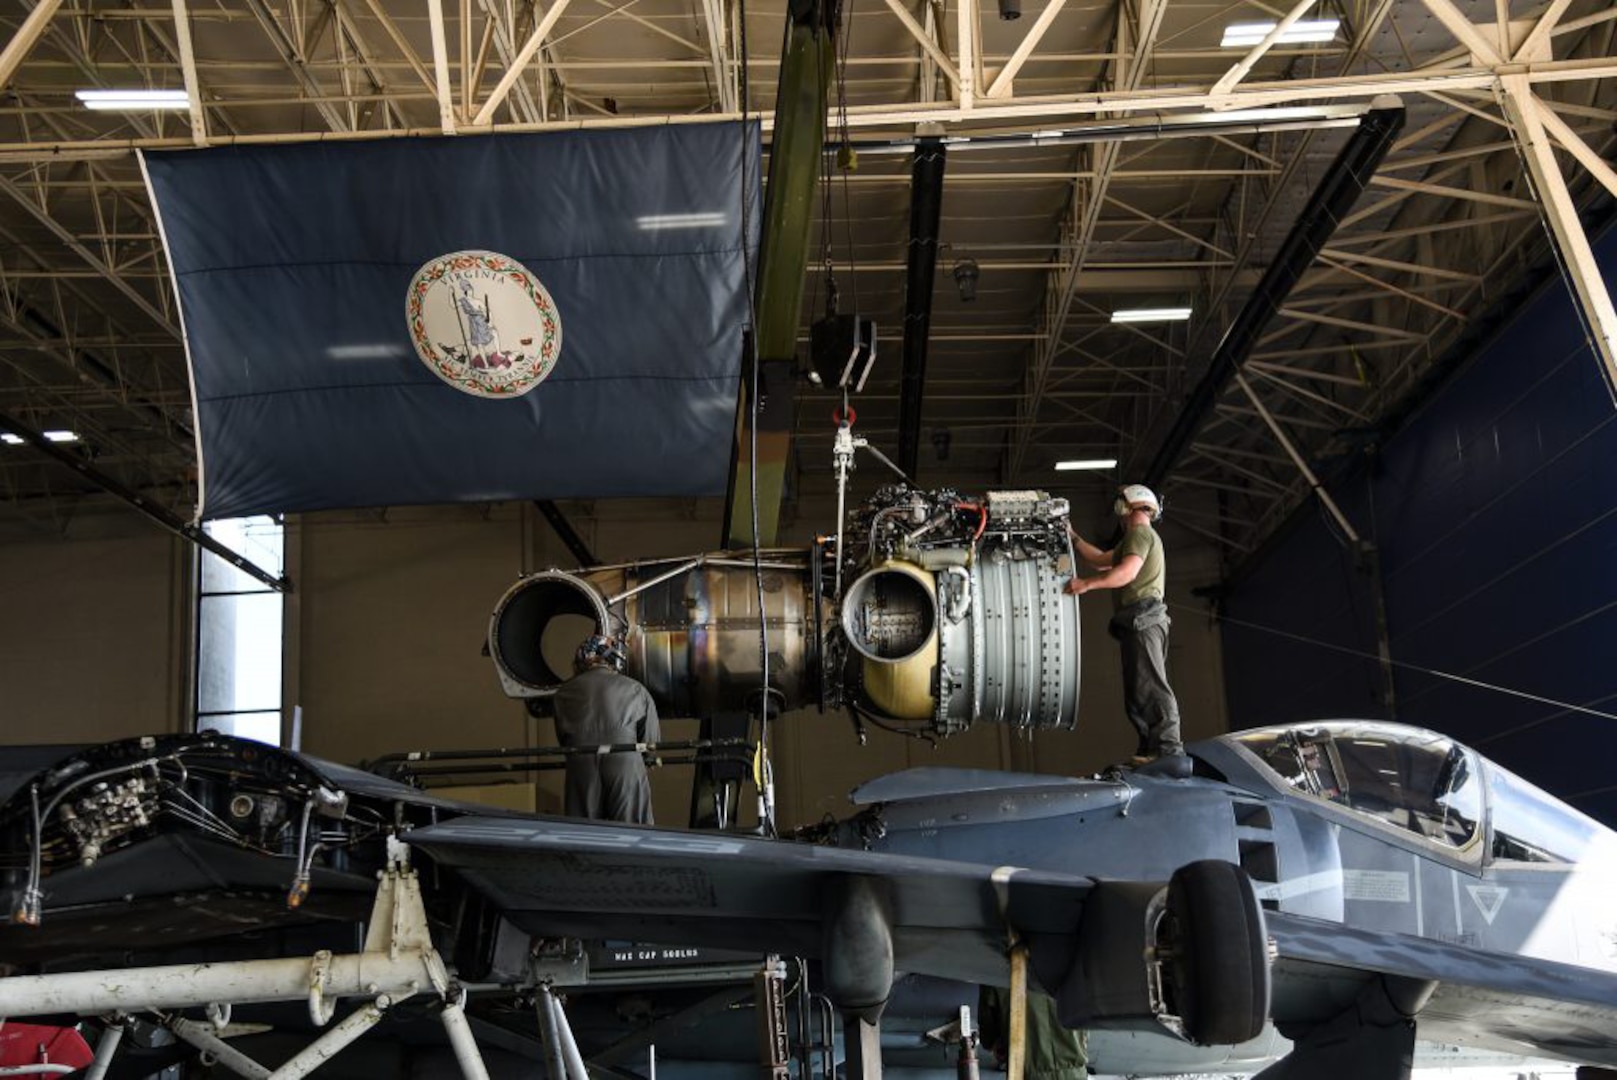 Marines assigned to Marine Attack Squadron 223, Cherry Point, North Carolina, install a new engine in an AV-8B Harrier jet Oct. 1, 2020, at the Virginia National Guard’s Army Aviation Support Facility in Sandston, Virginia.